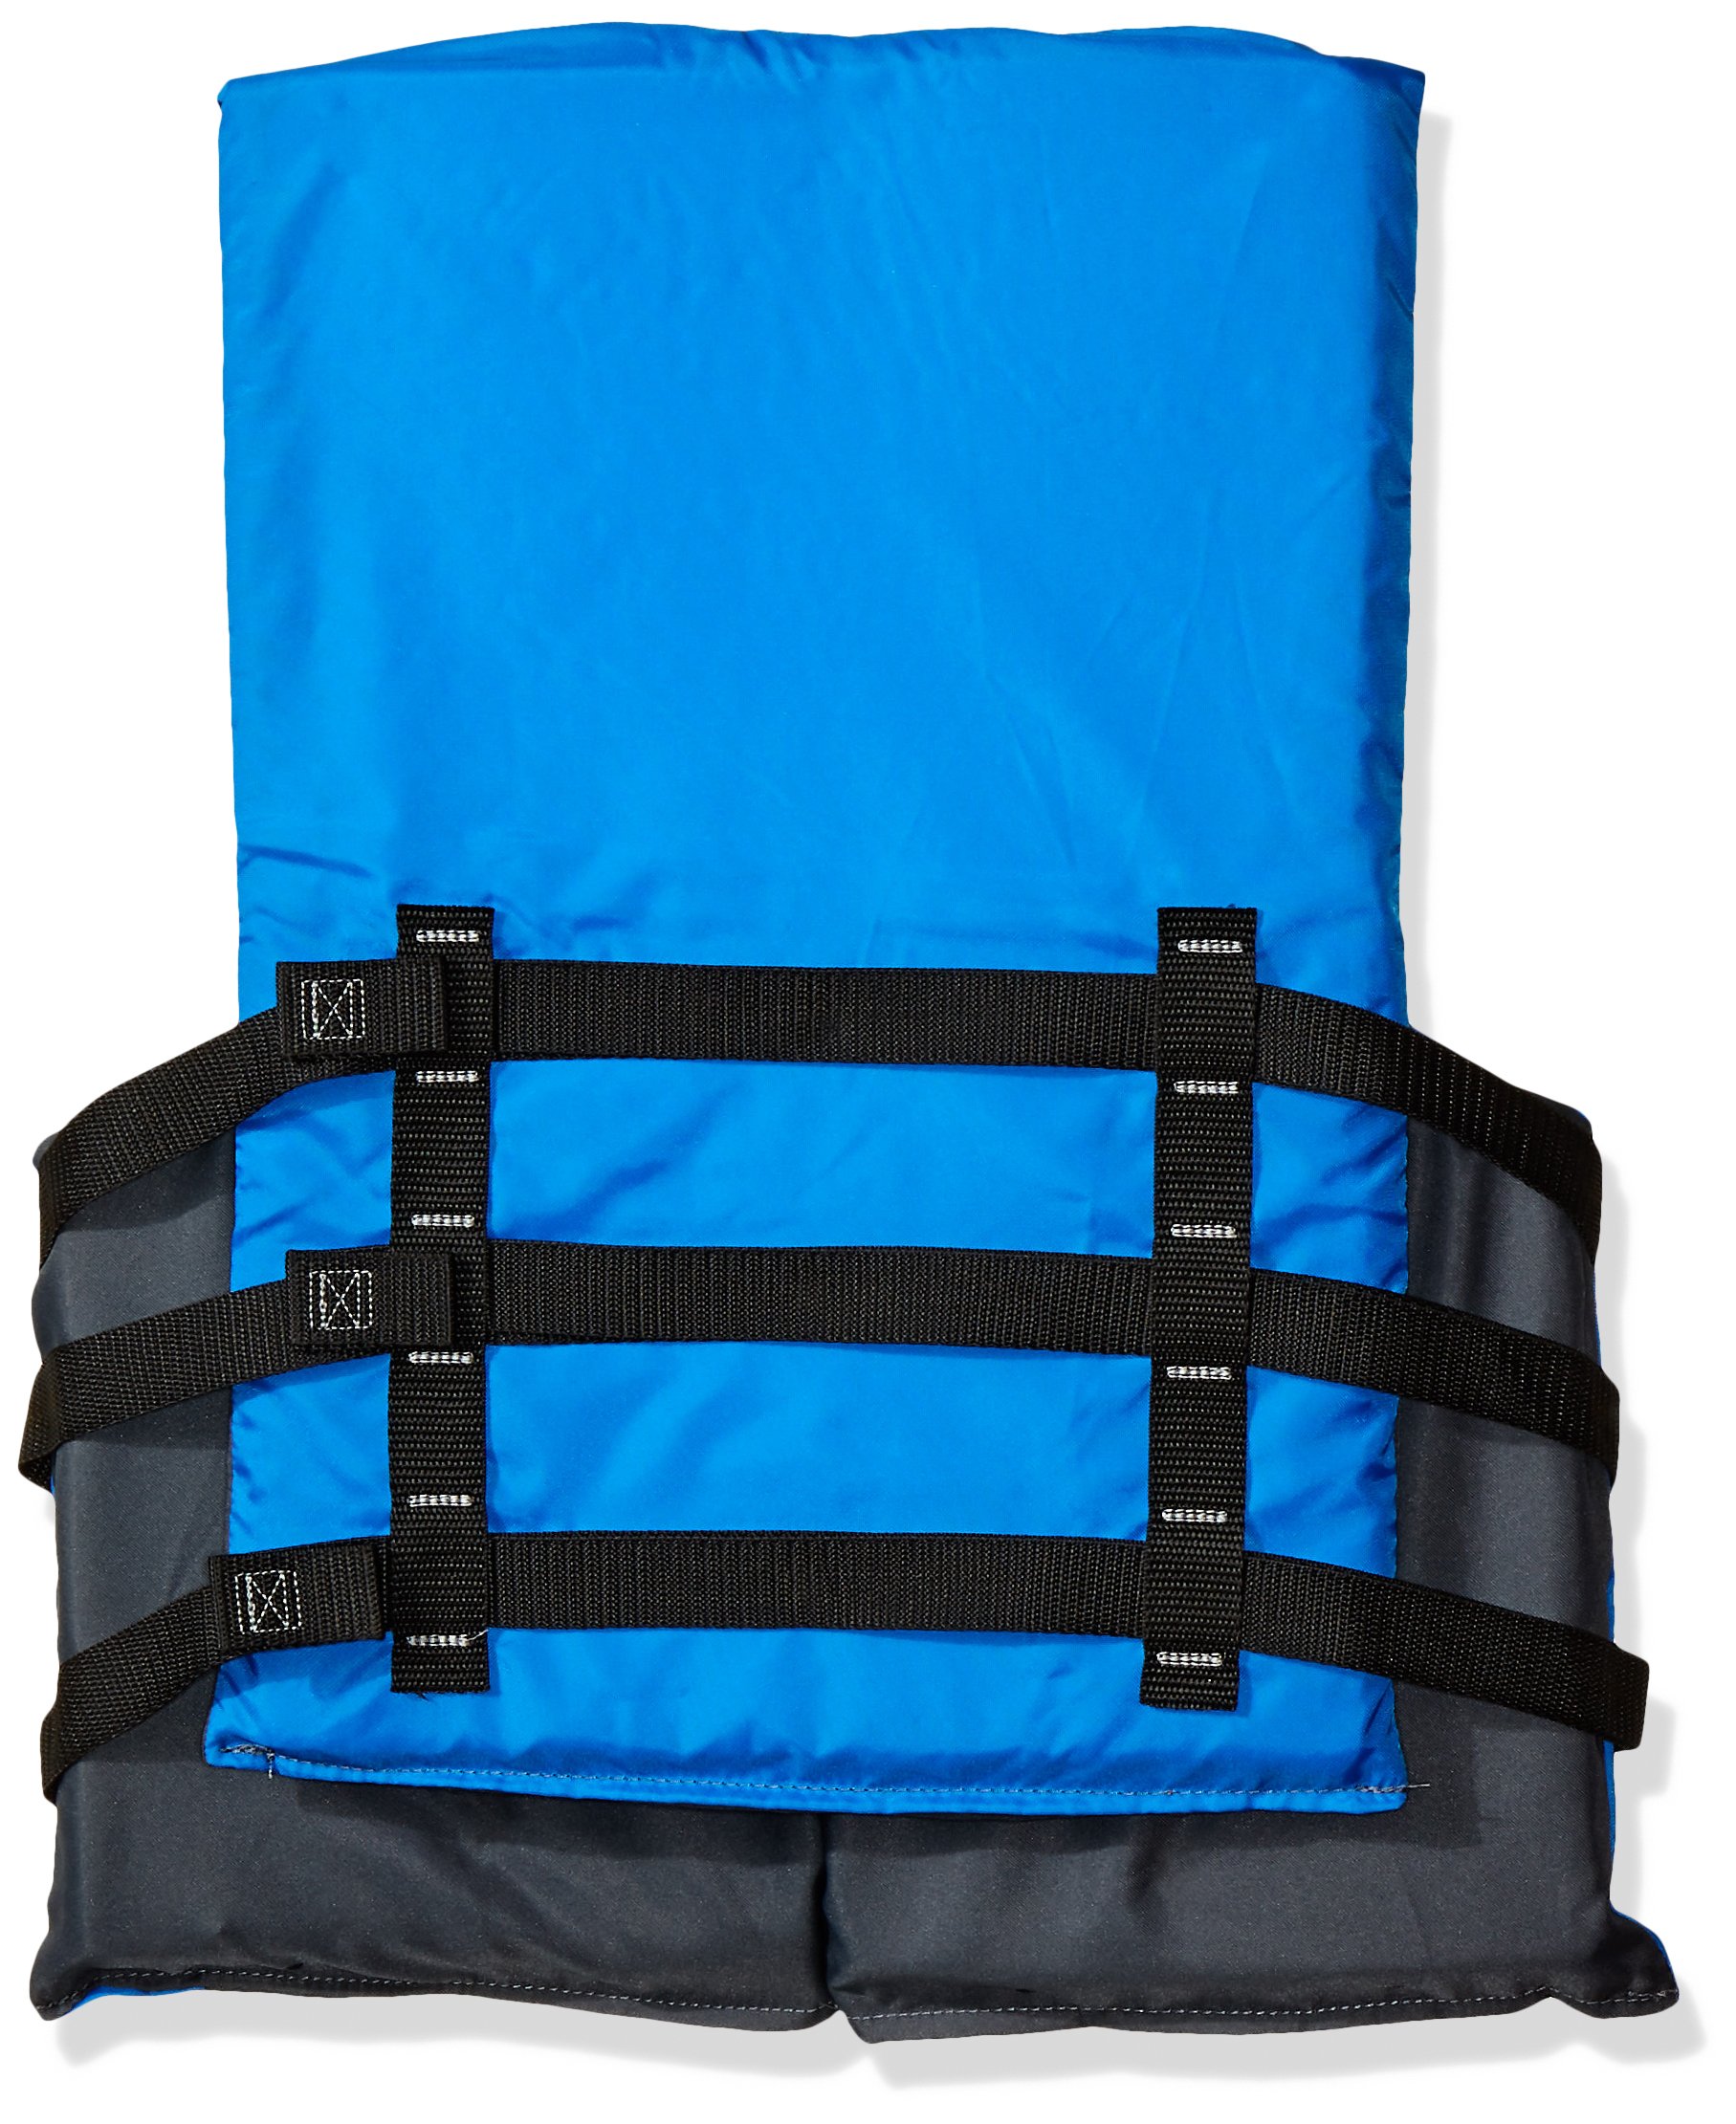 Stearns Adult Watersport Classic Series Life Vest, USCG Approved Type III Life Jacket for Adults, Great for Boating, Fishing, Tubing, & Other Water Sports, Standard & Oversized Options